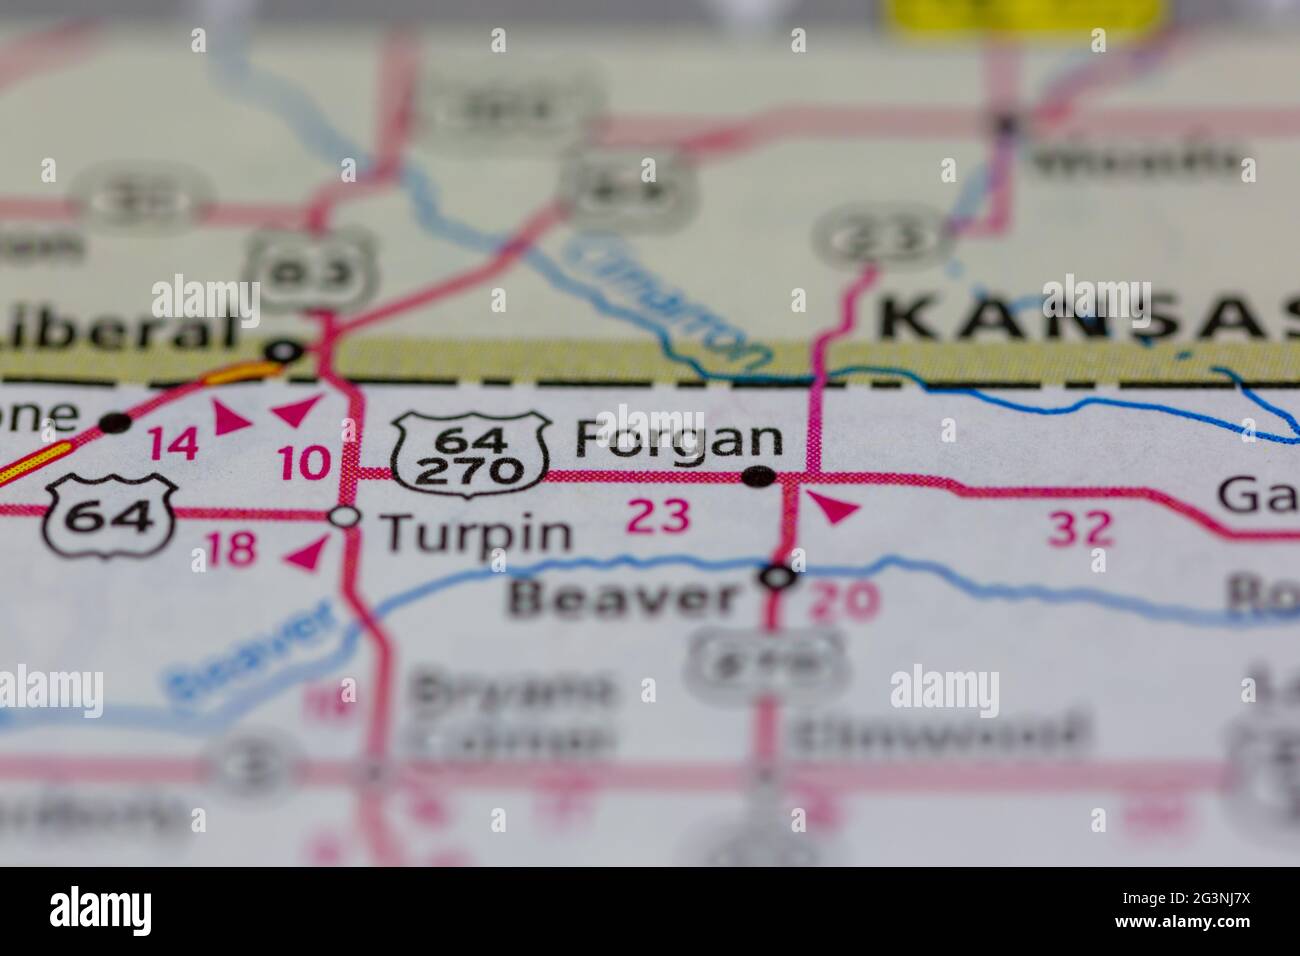 Forgan Oklahoma USA shown on a Geography map or road map Stock Photo